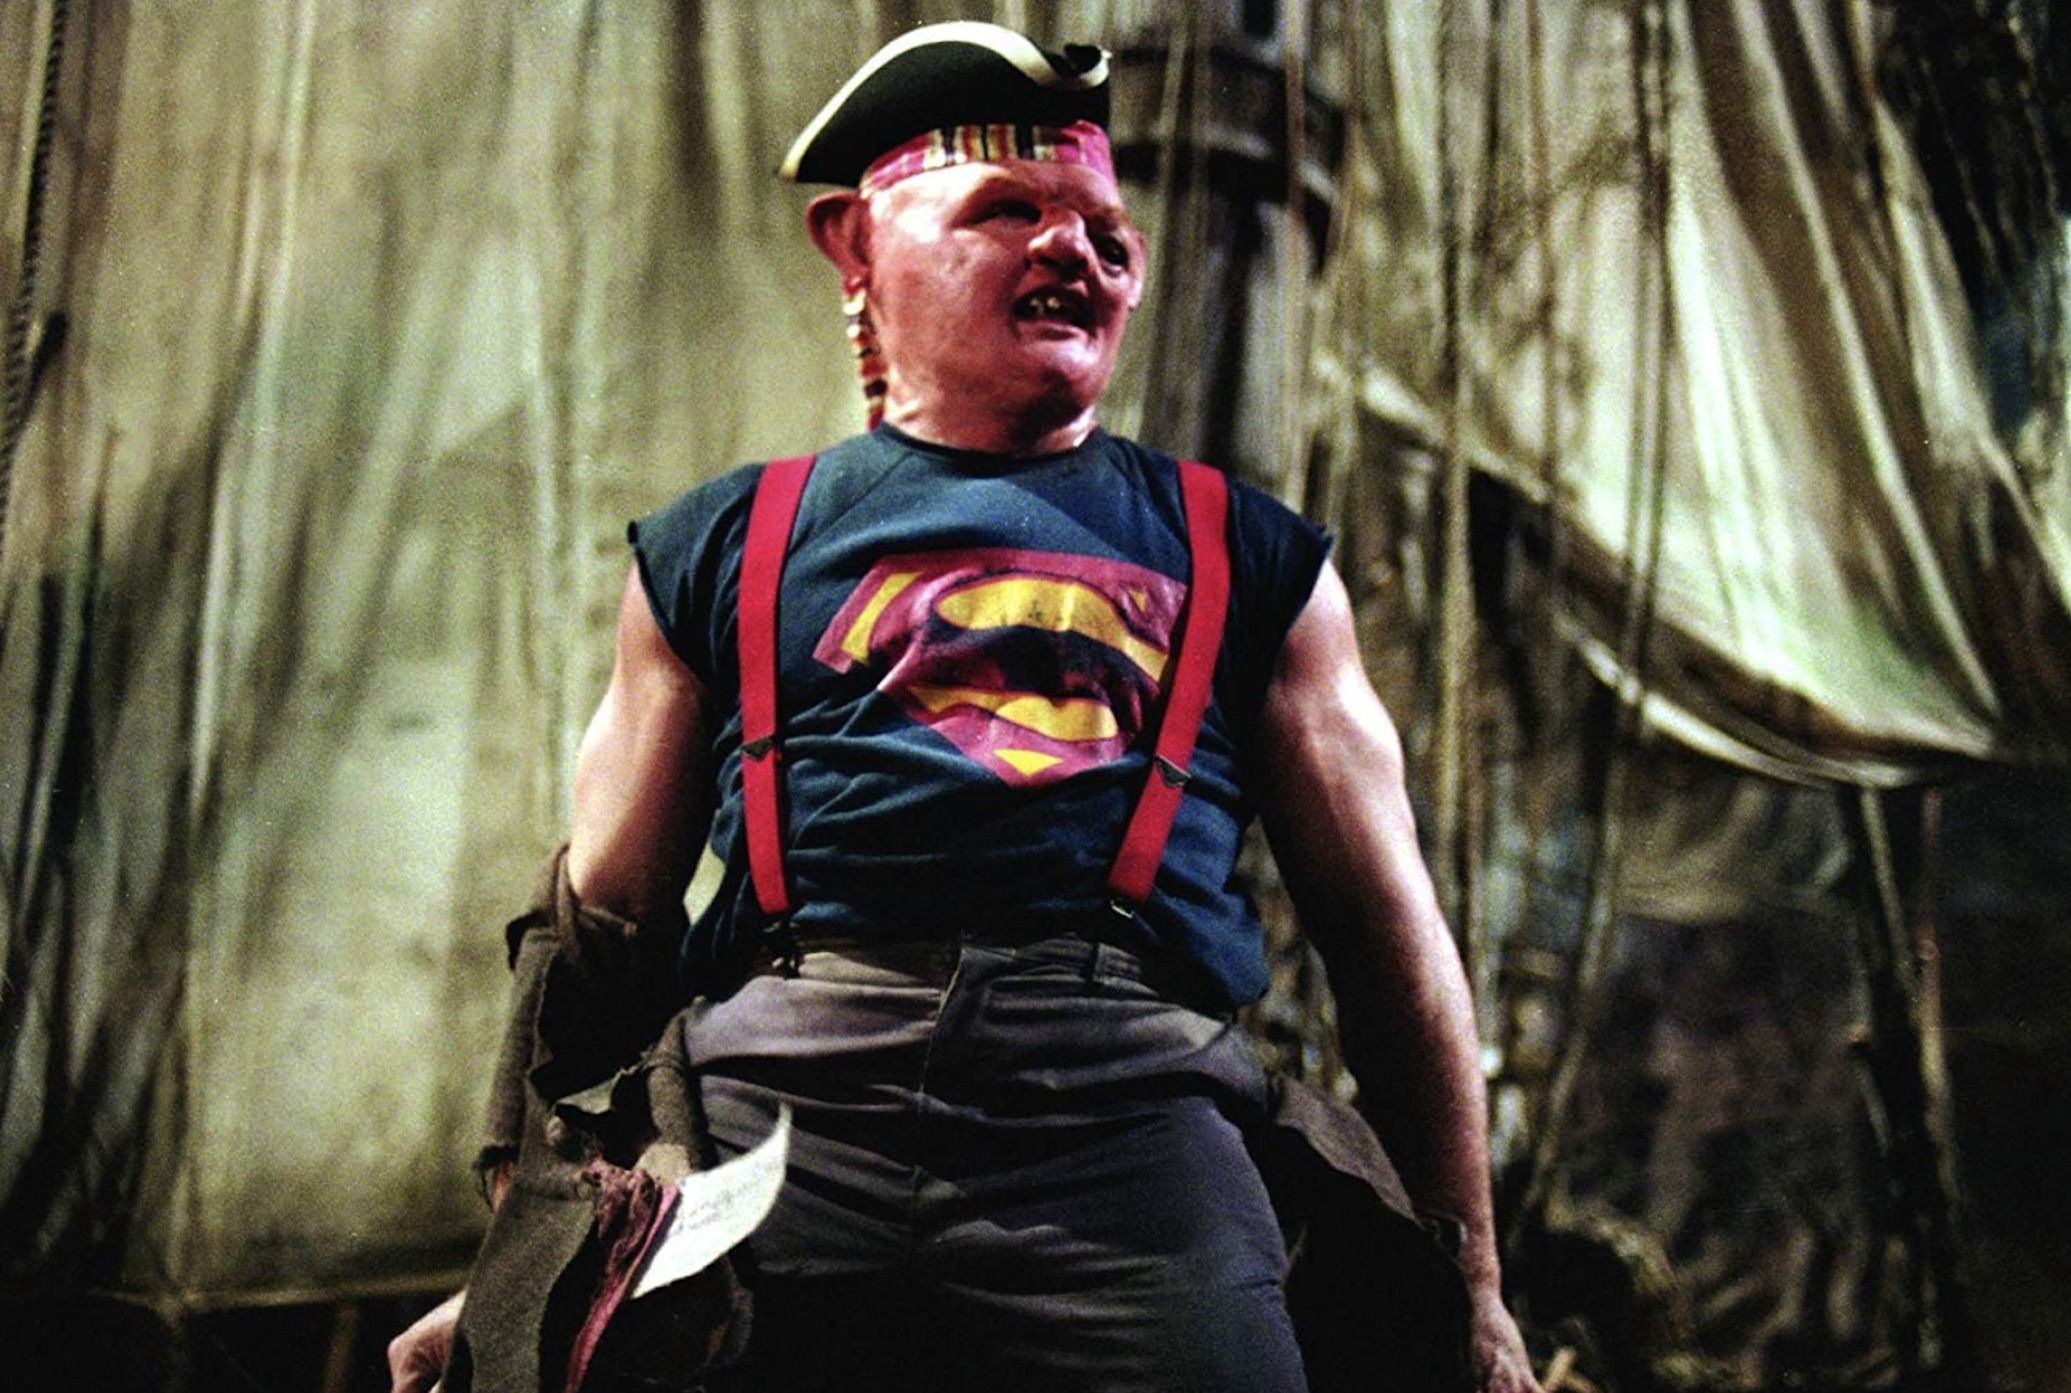 Sloth S Makeup Test For The Goonies Has Been Unearthed 35 Years Later Mental Floss